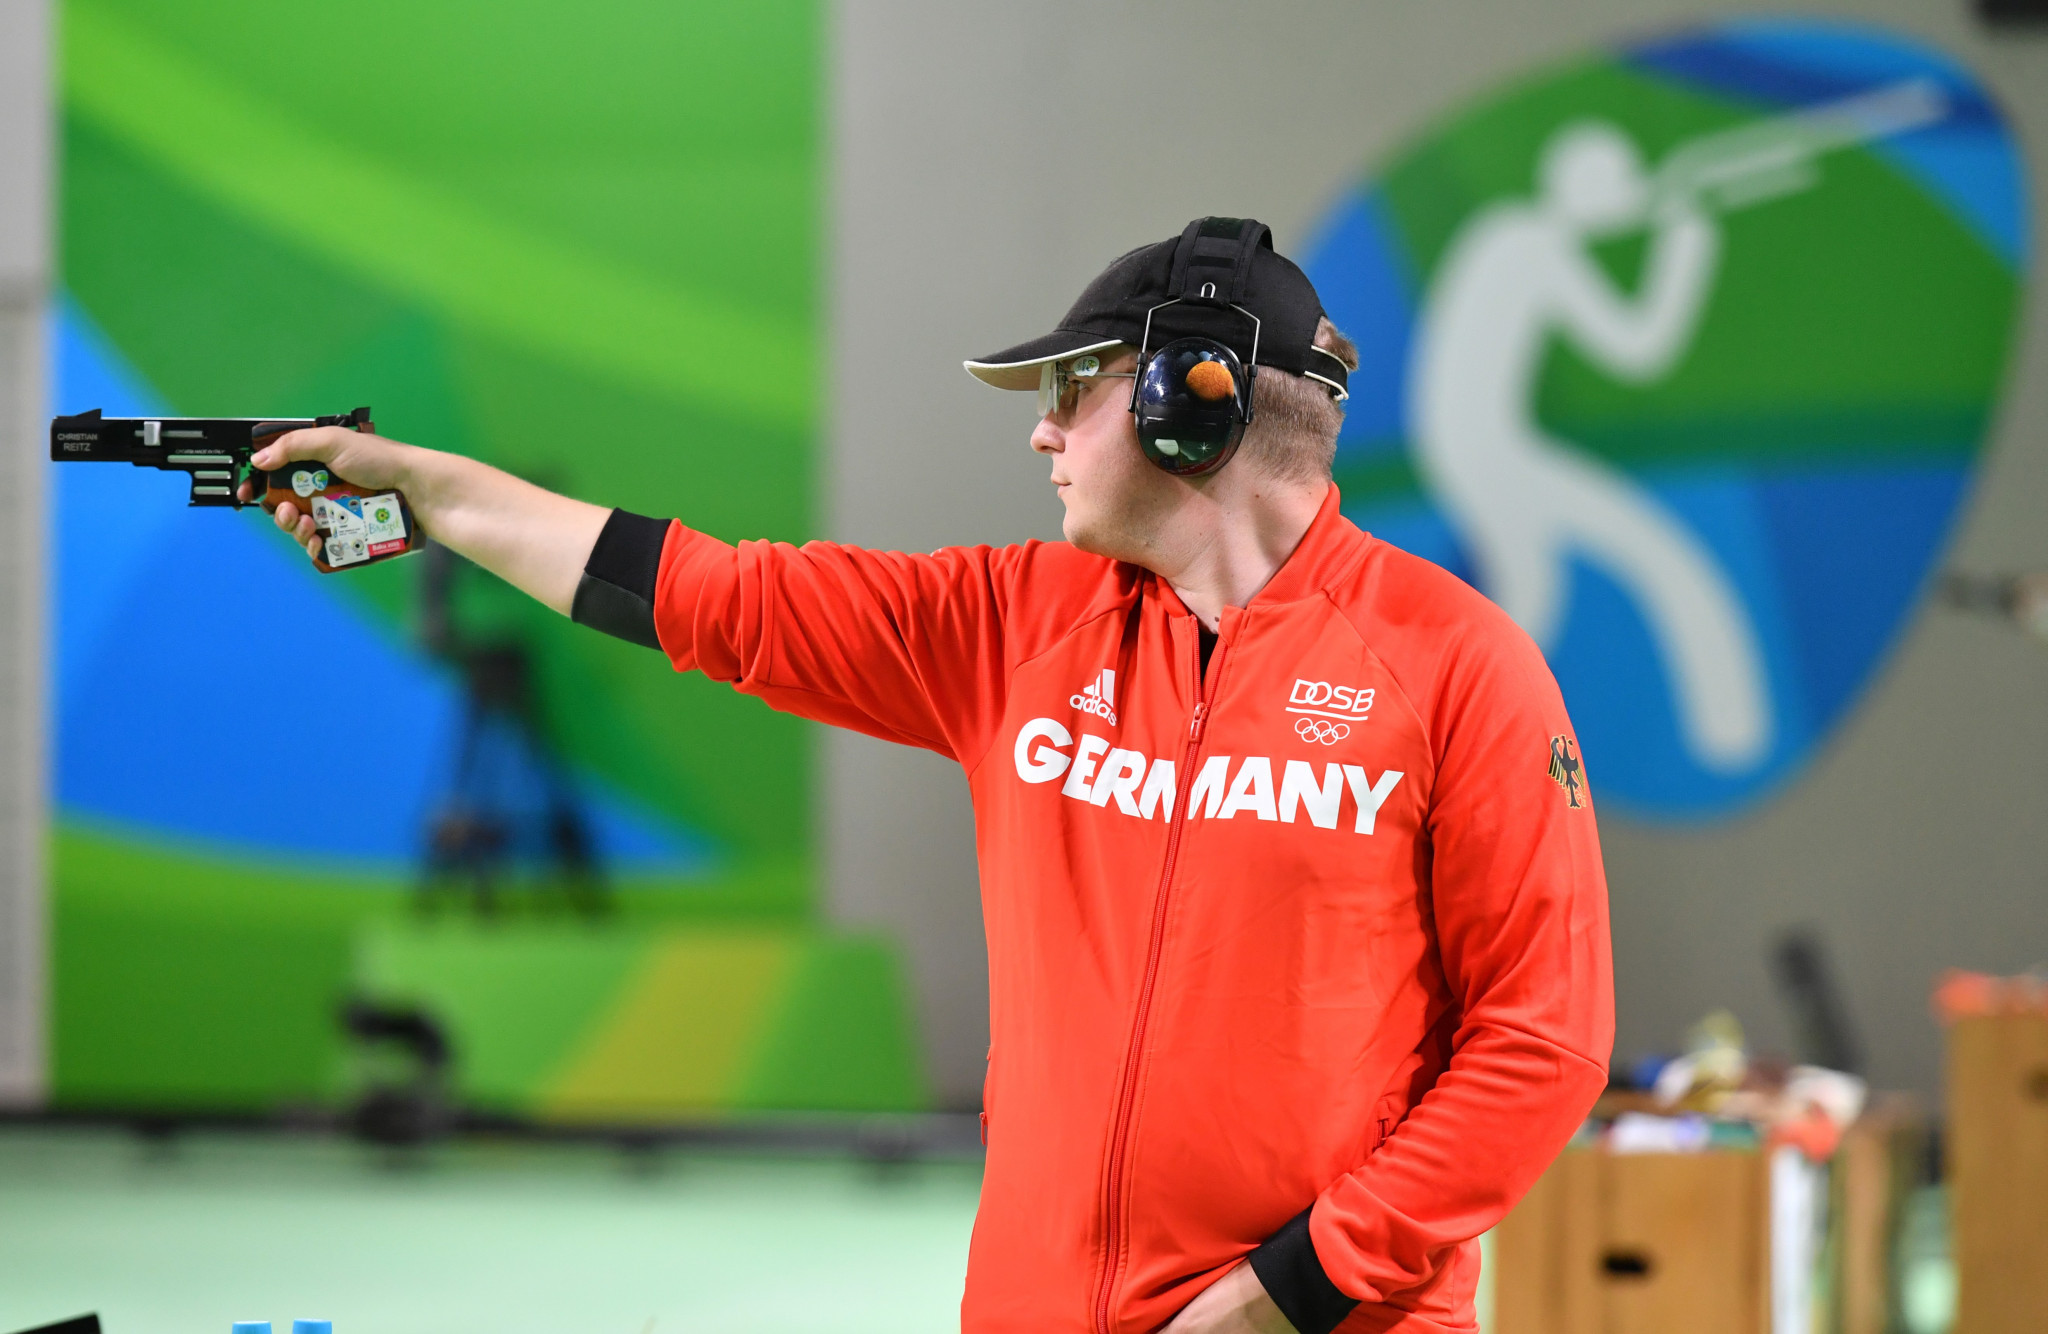 Olympic 25m rapid fire pistol champion Christian Reitz is among the Rio 2016 gold medallists competing this week ©Getty Images